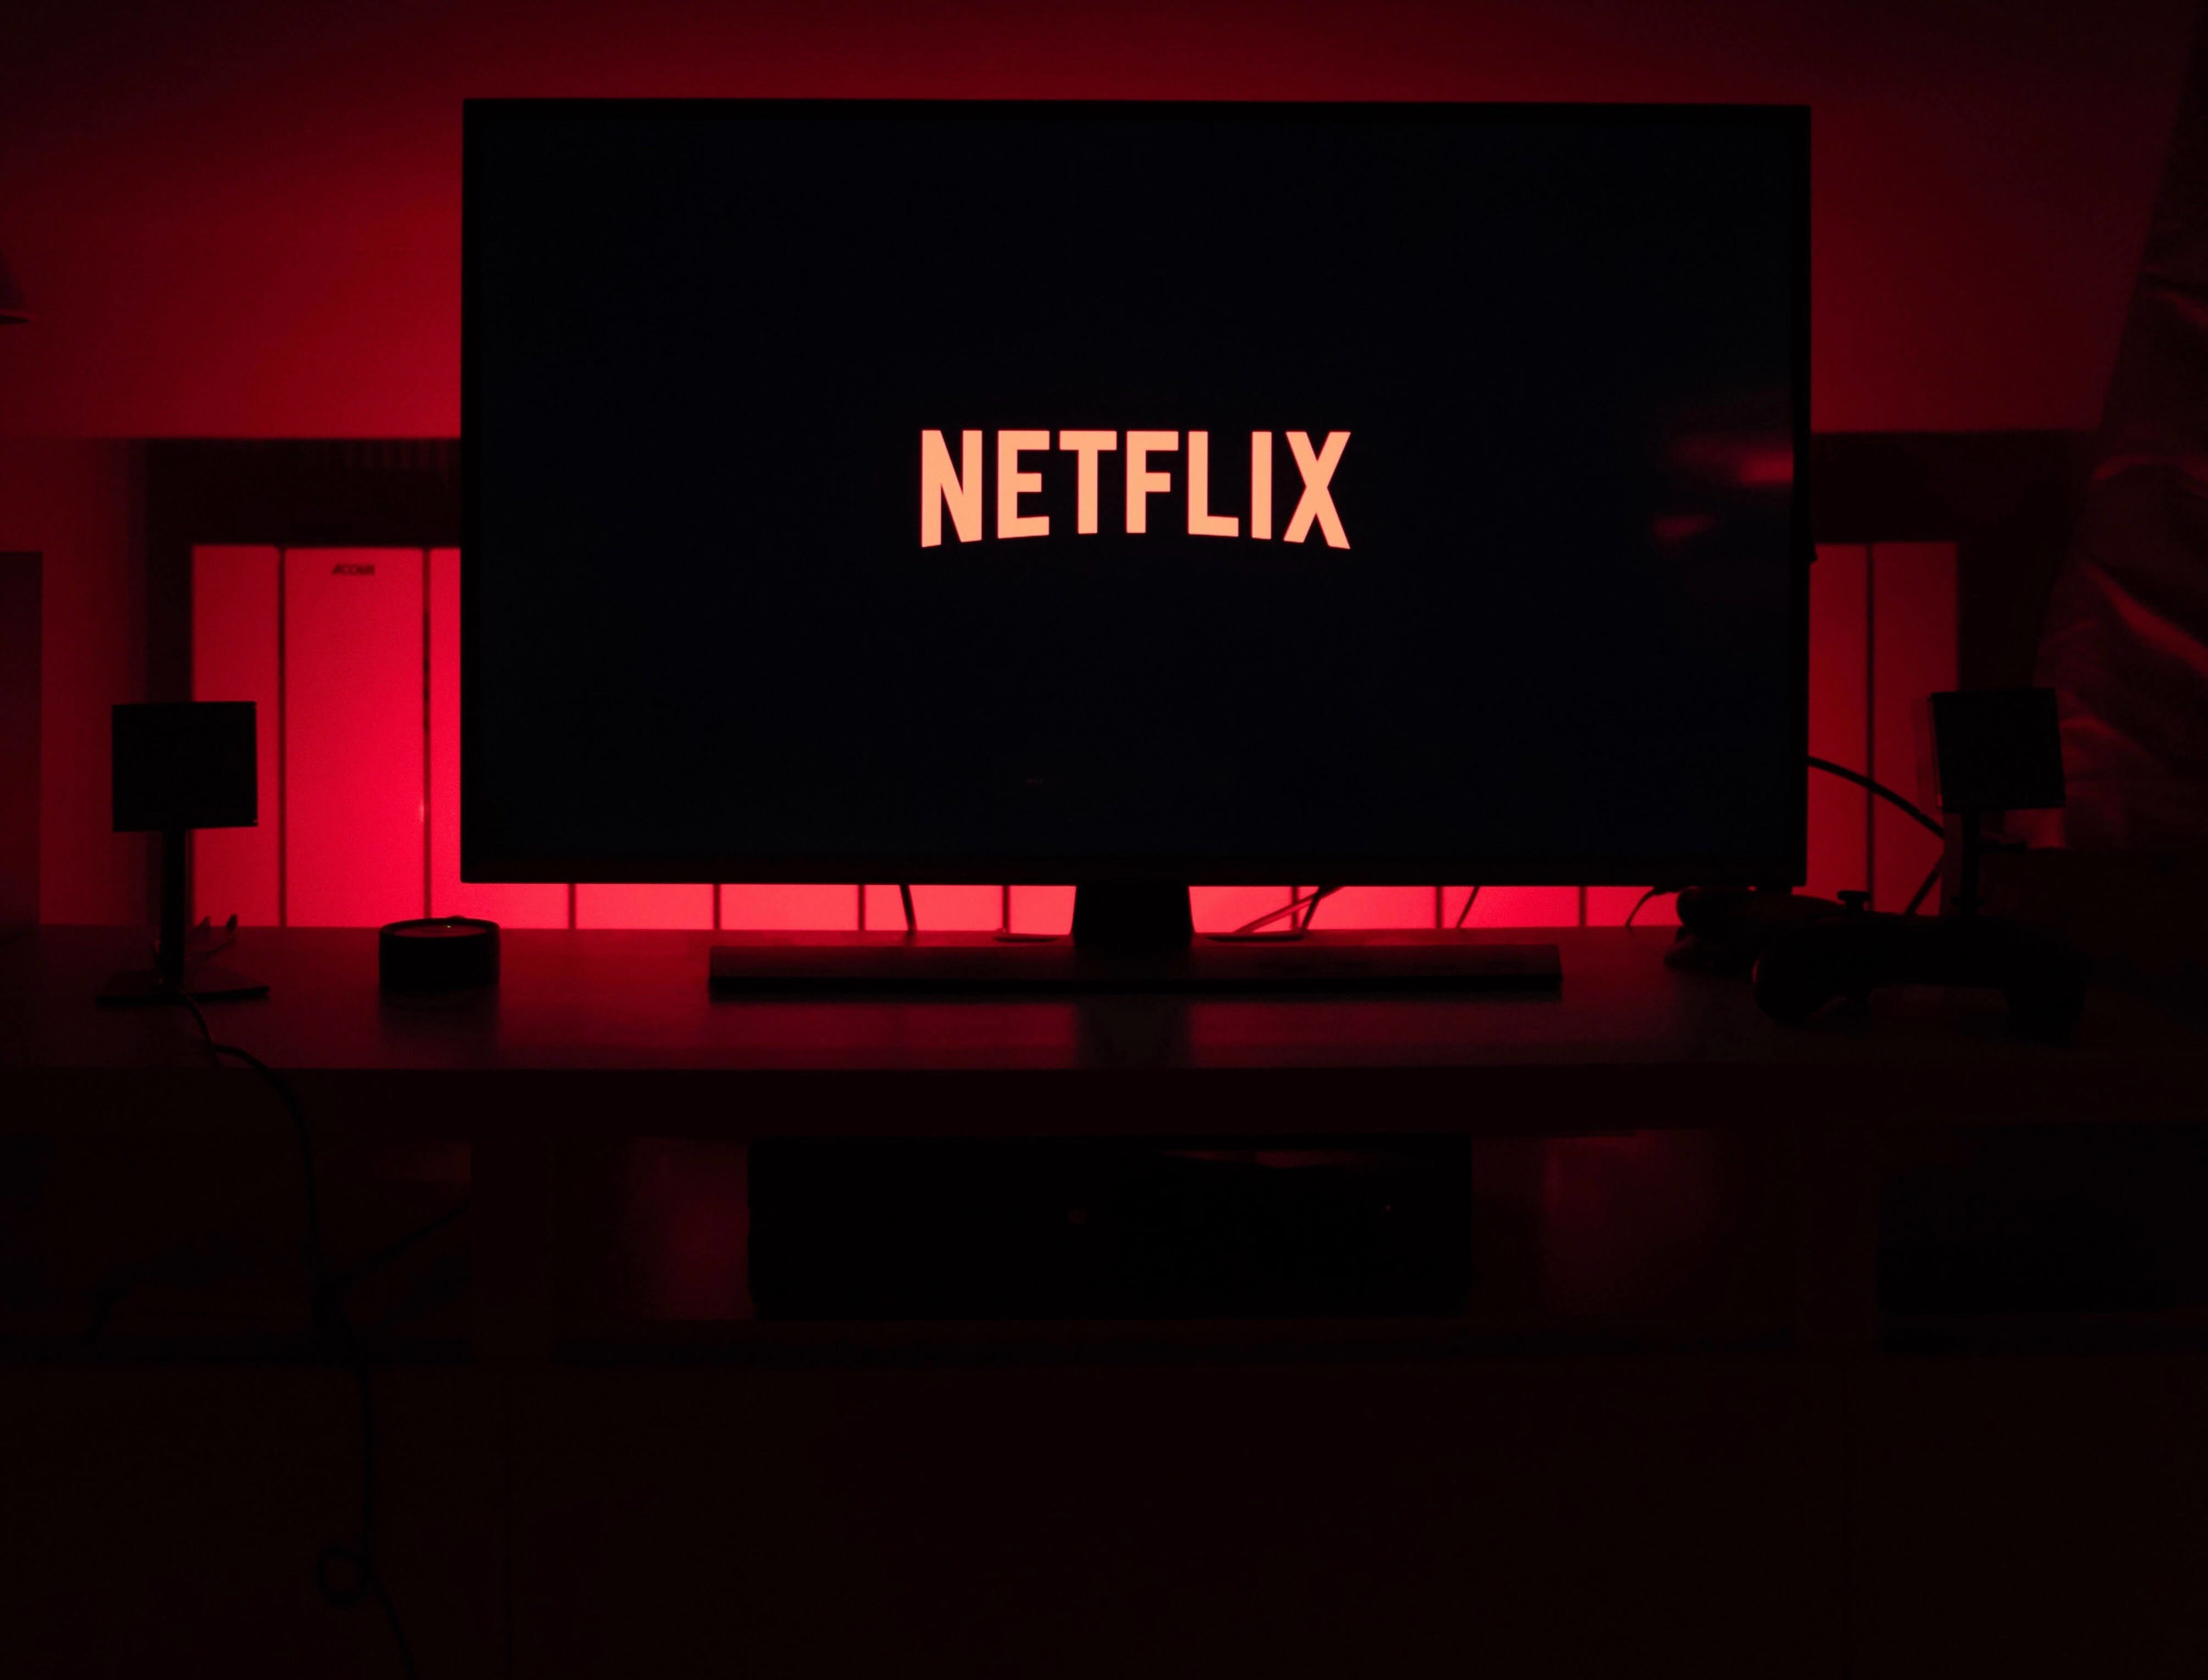 Stop Showing Video In High Definition – EU To Netflix, Others  